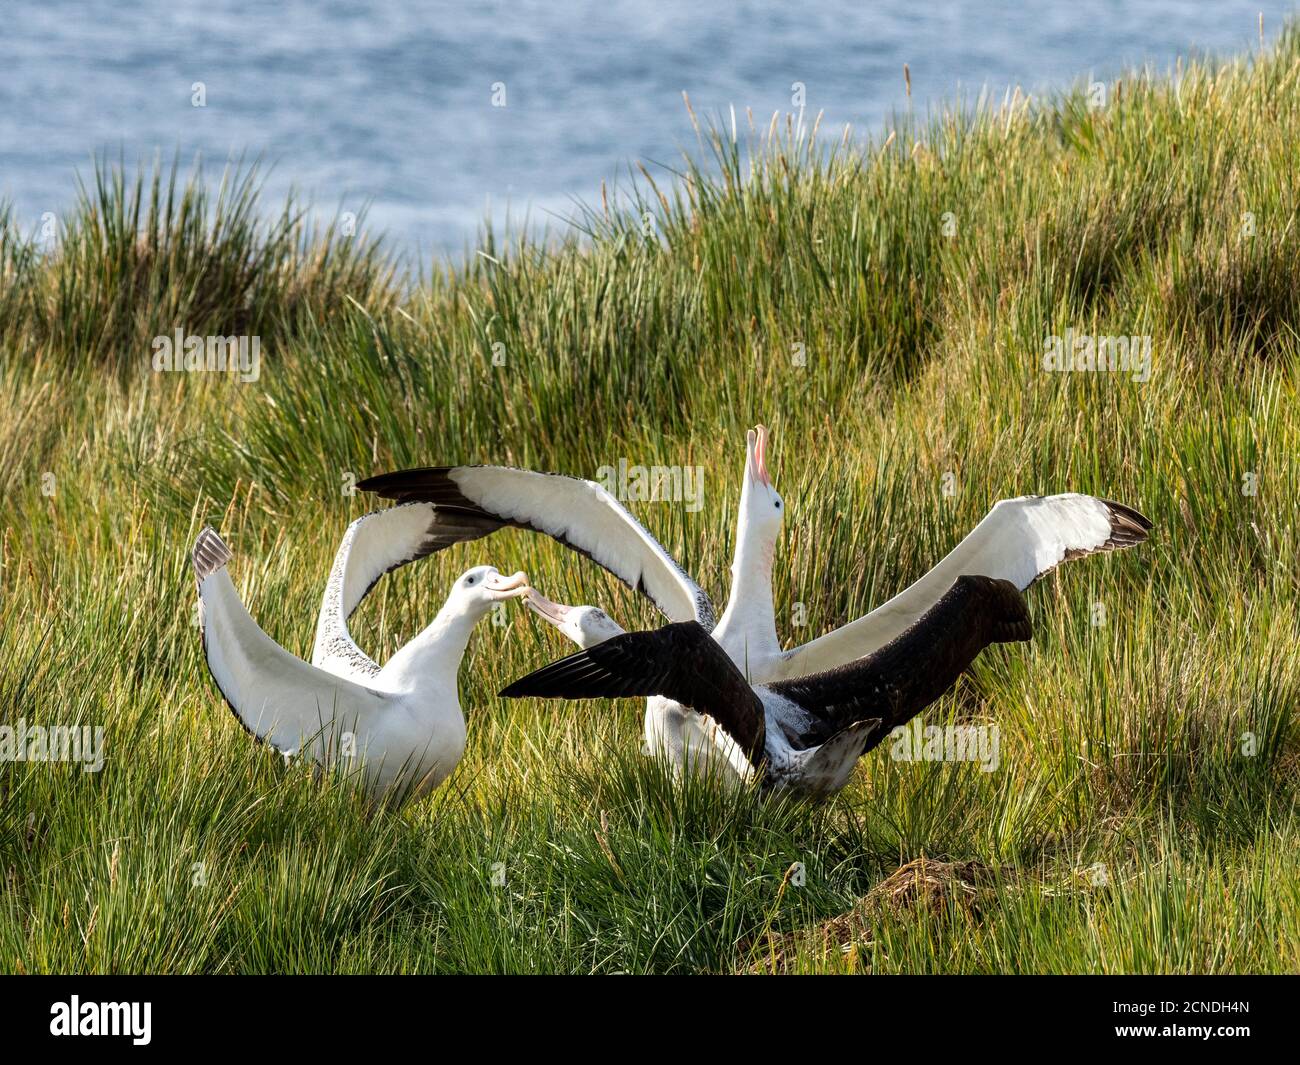 Wandering albatross (Diomedea exulans) trio in courtship display on Prion Island, Bay of Isles, South Georgia, Polar Regions Stock Photo